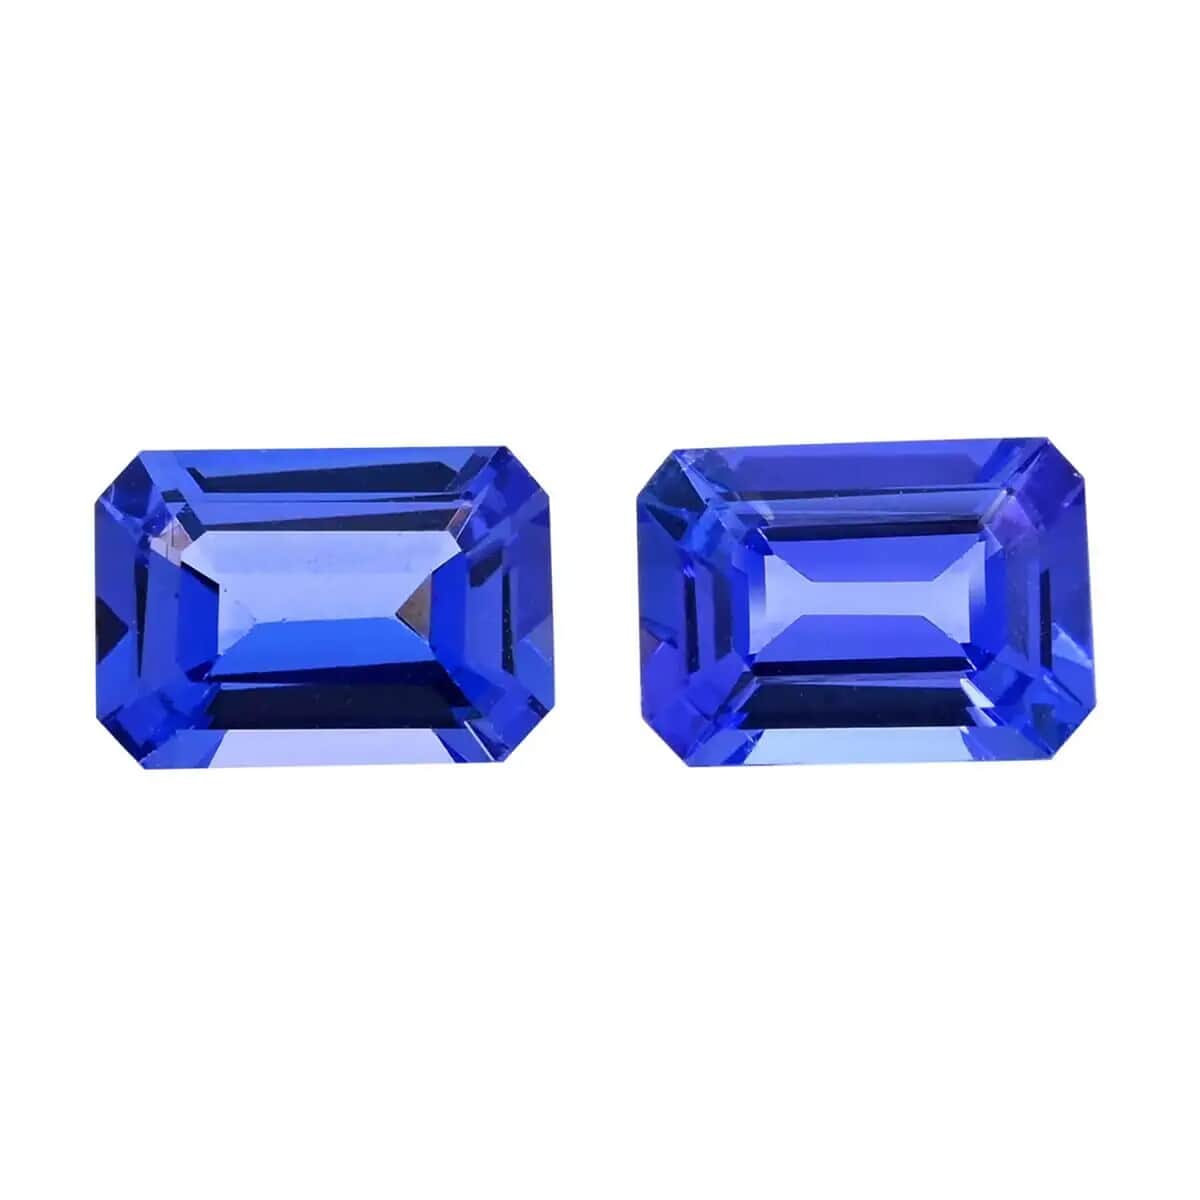 Certified & Appraised AAAA Tanzanite Set of 2 (Oct 7x5 mm) 2.00 ctw, Loose Gemstones, Gemstone For Jewelry, Jewelry Stones image number 0